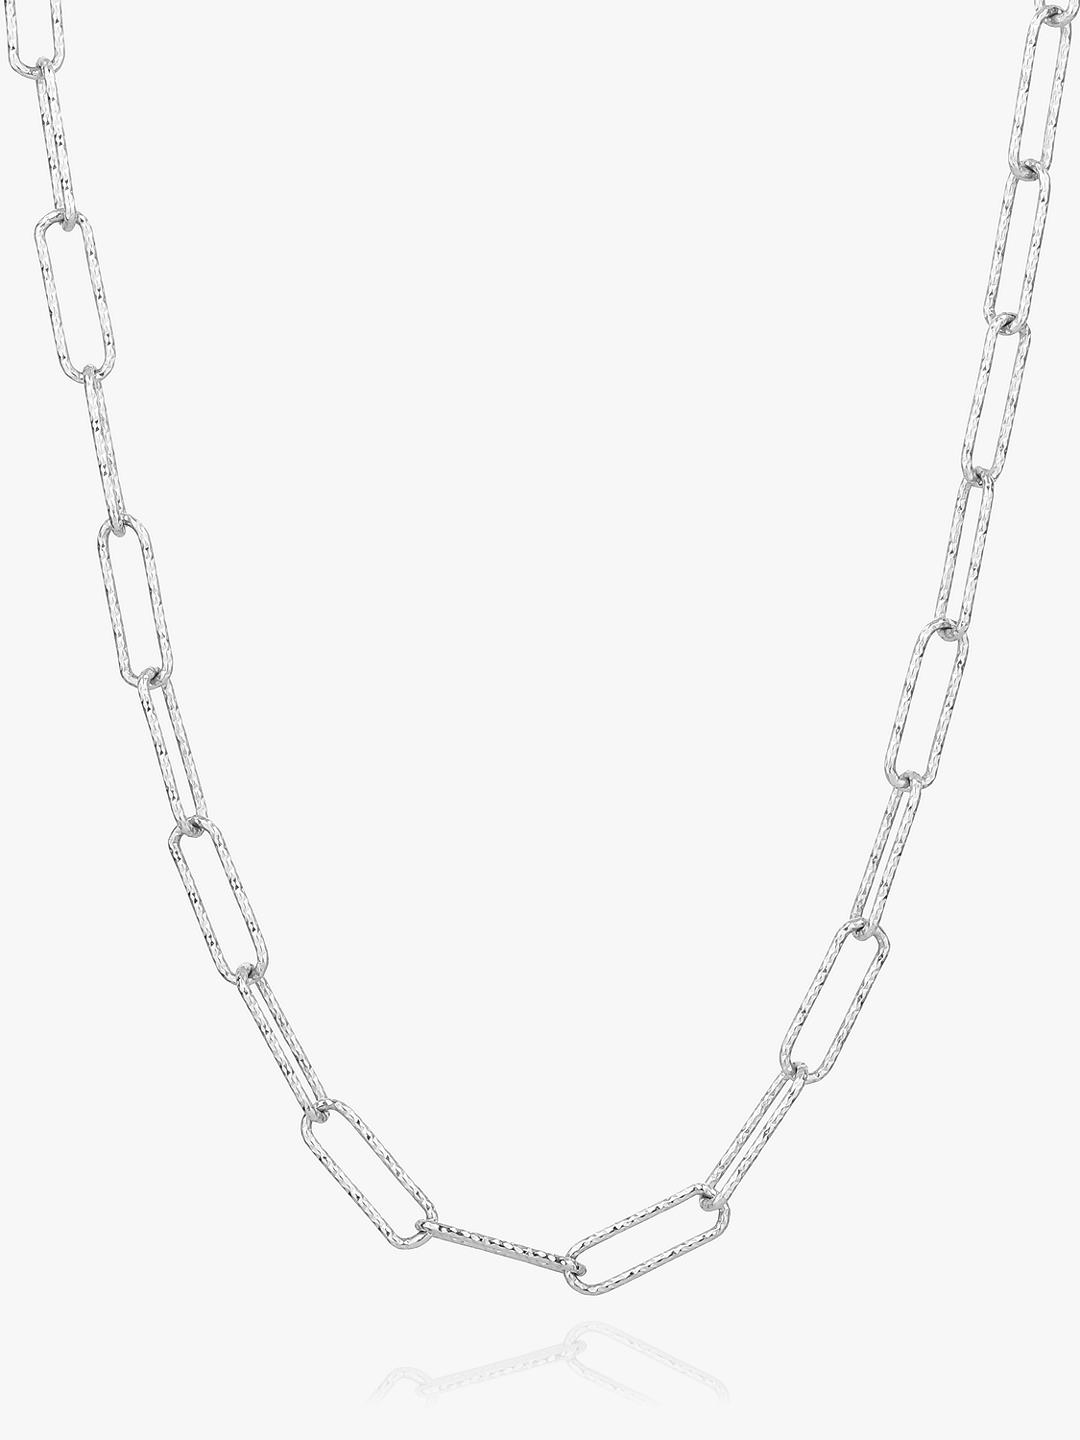 Sif Jakobs Jewellery Textured Paperclip Link Chain Necklace, Silver